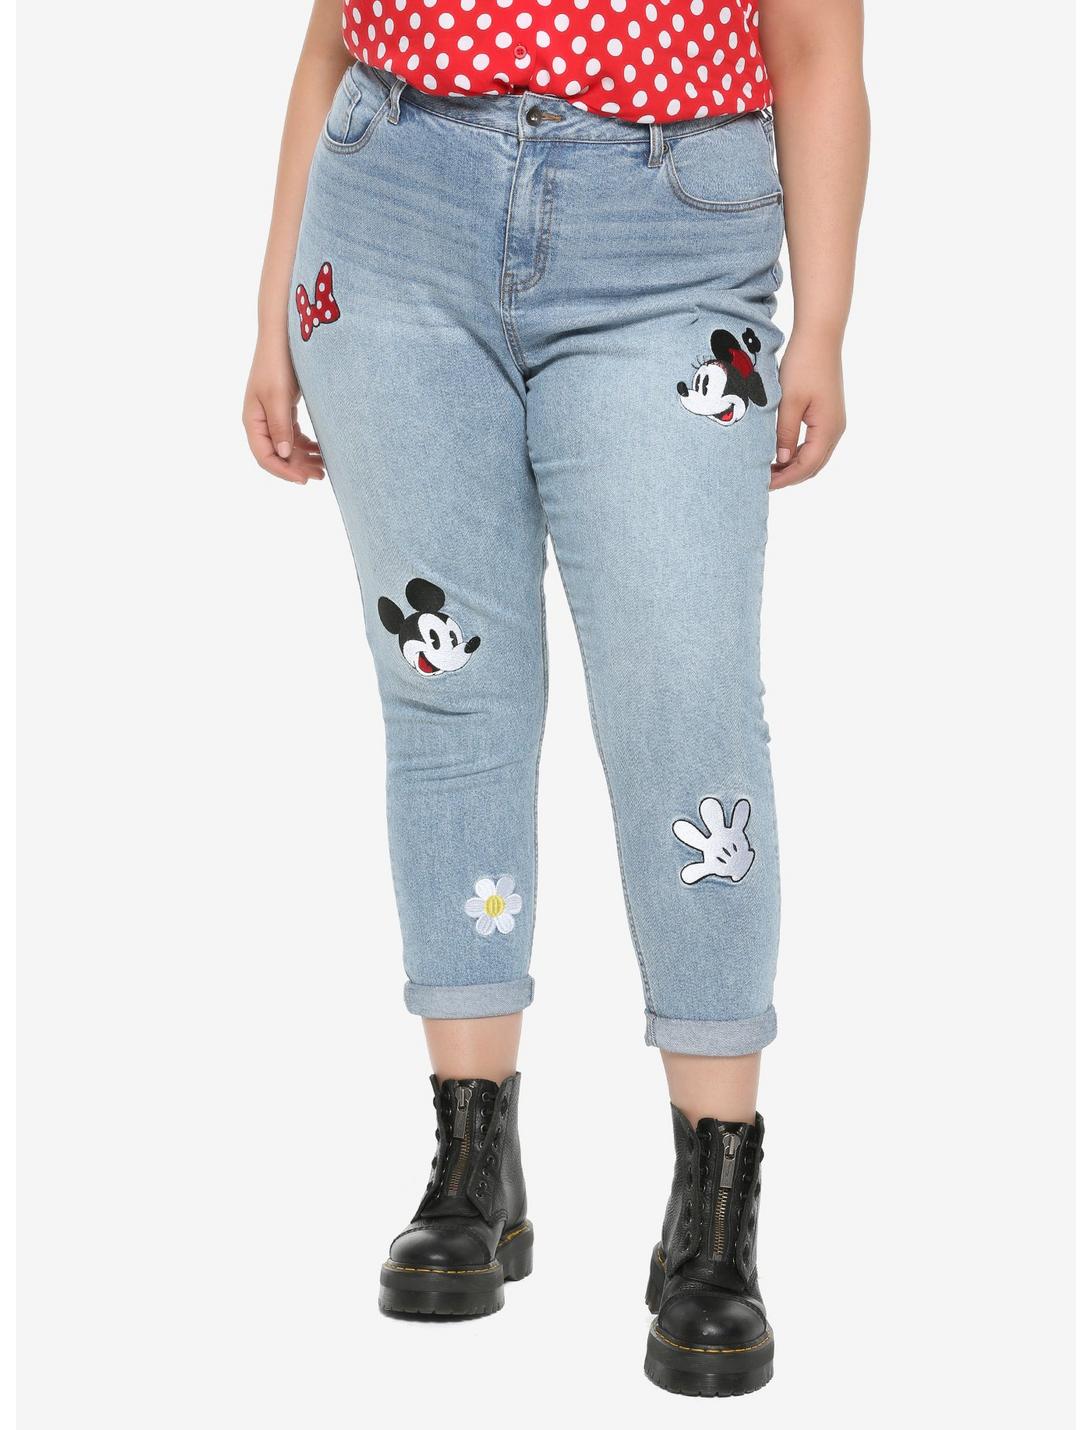 Plus Size Her Universe Disney Minnie Mouse & Mickey Mouse Embroidered Mom Jeans Plus Size, MULTI, hi-res